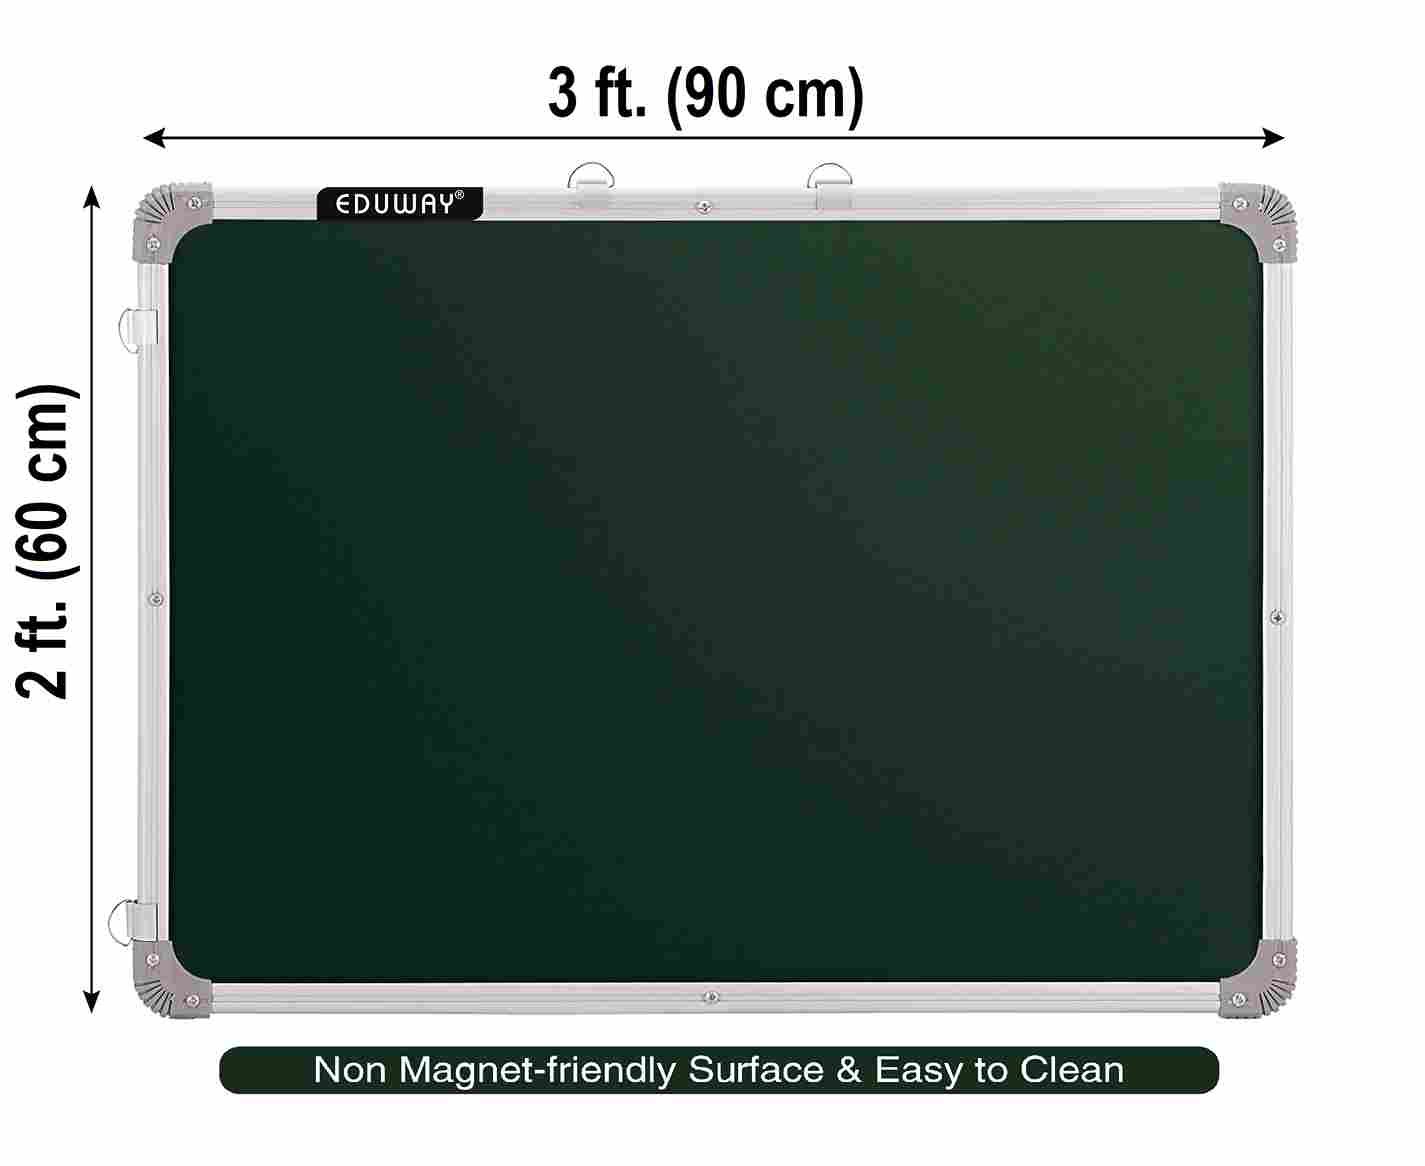 chalkboard 2x3 ft. with green surface non magnetic back side white surface